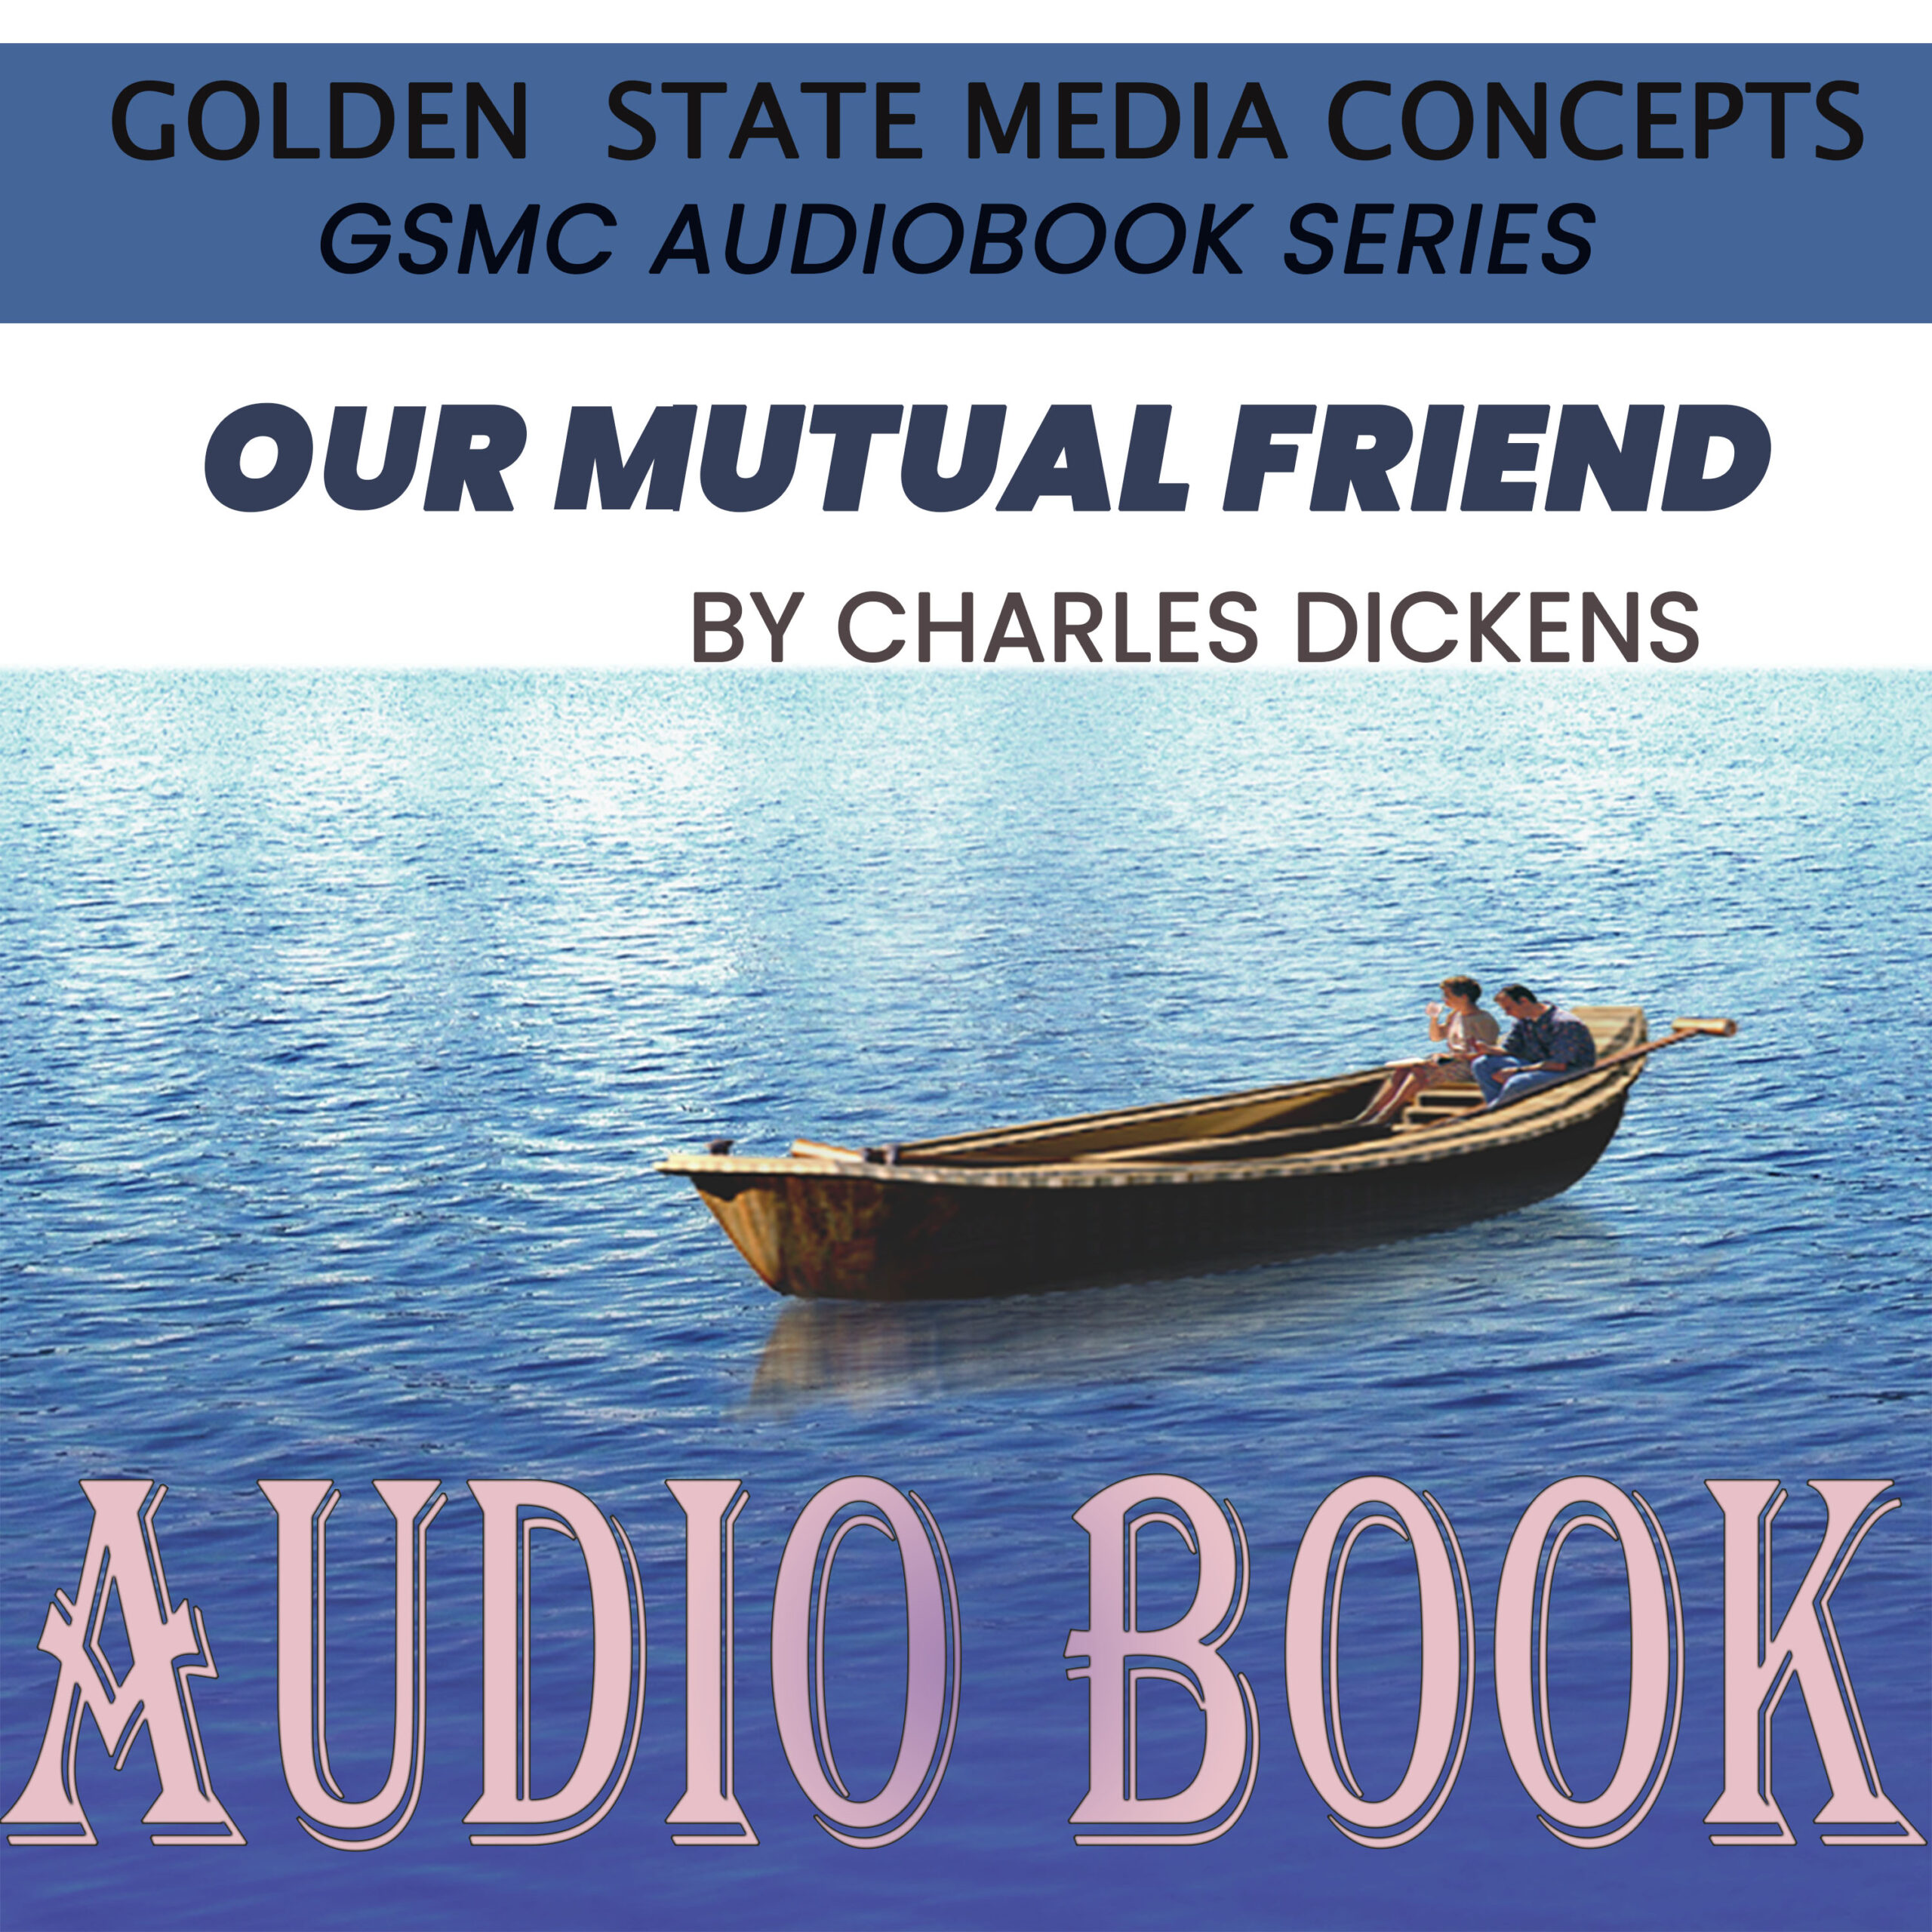 GSMC Audiobook Series: Our Mutual Friend by Charles Dickens